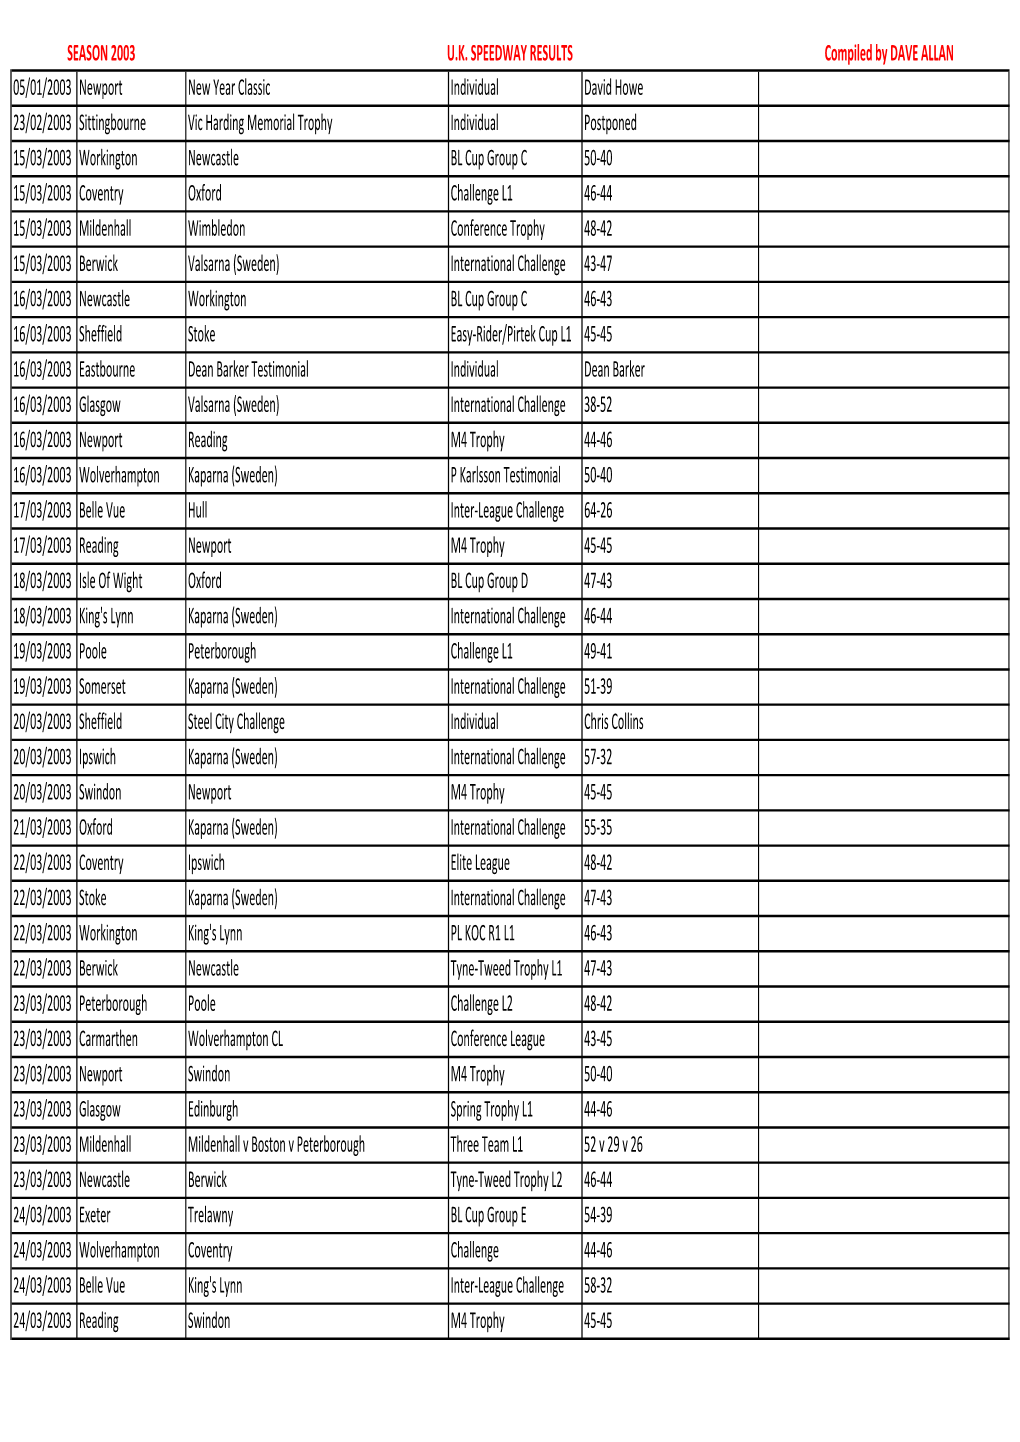 SEASON 2003 UK SPEEDWAY RESULTS Compiled by DAVE ALLAN